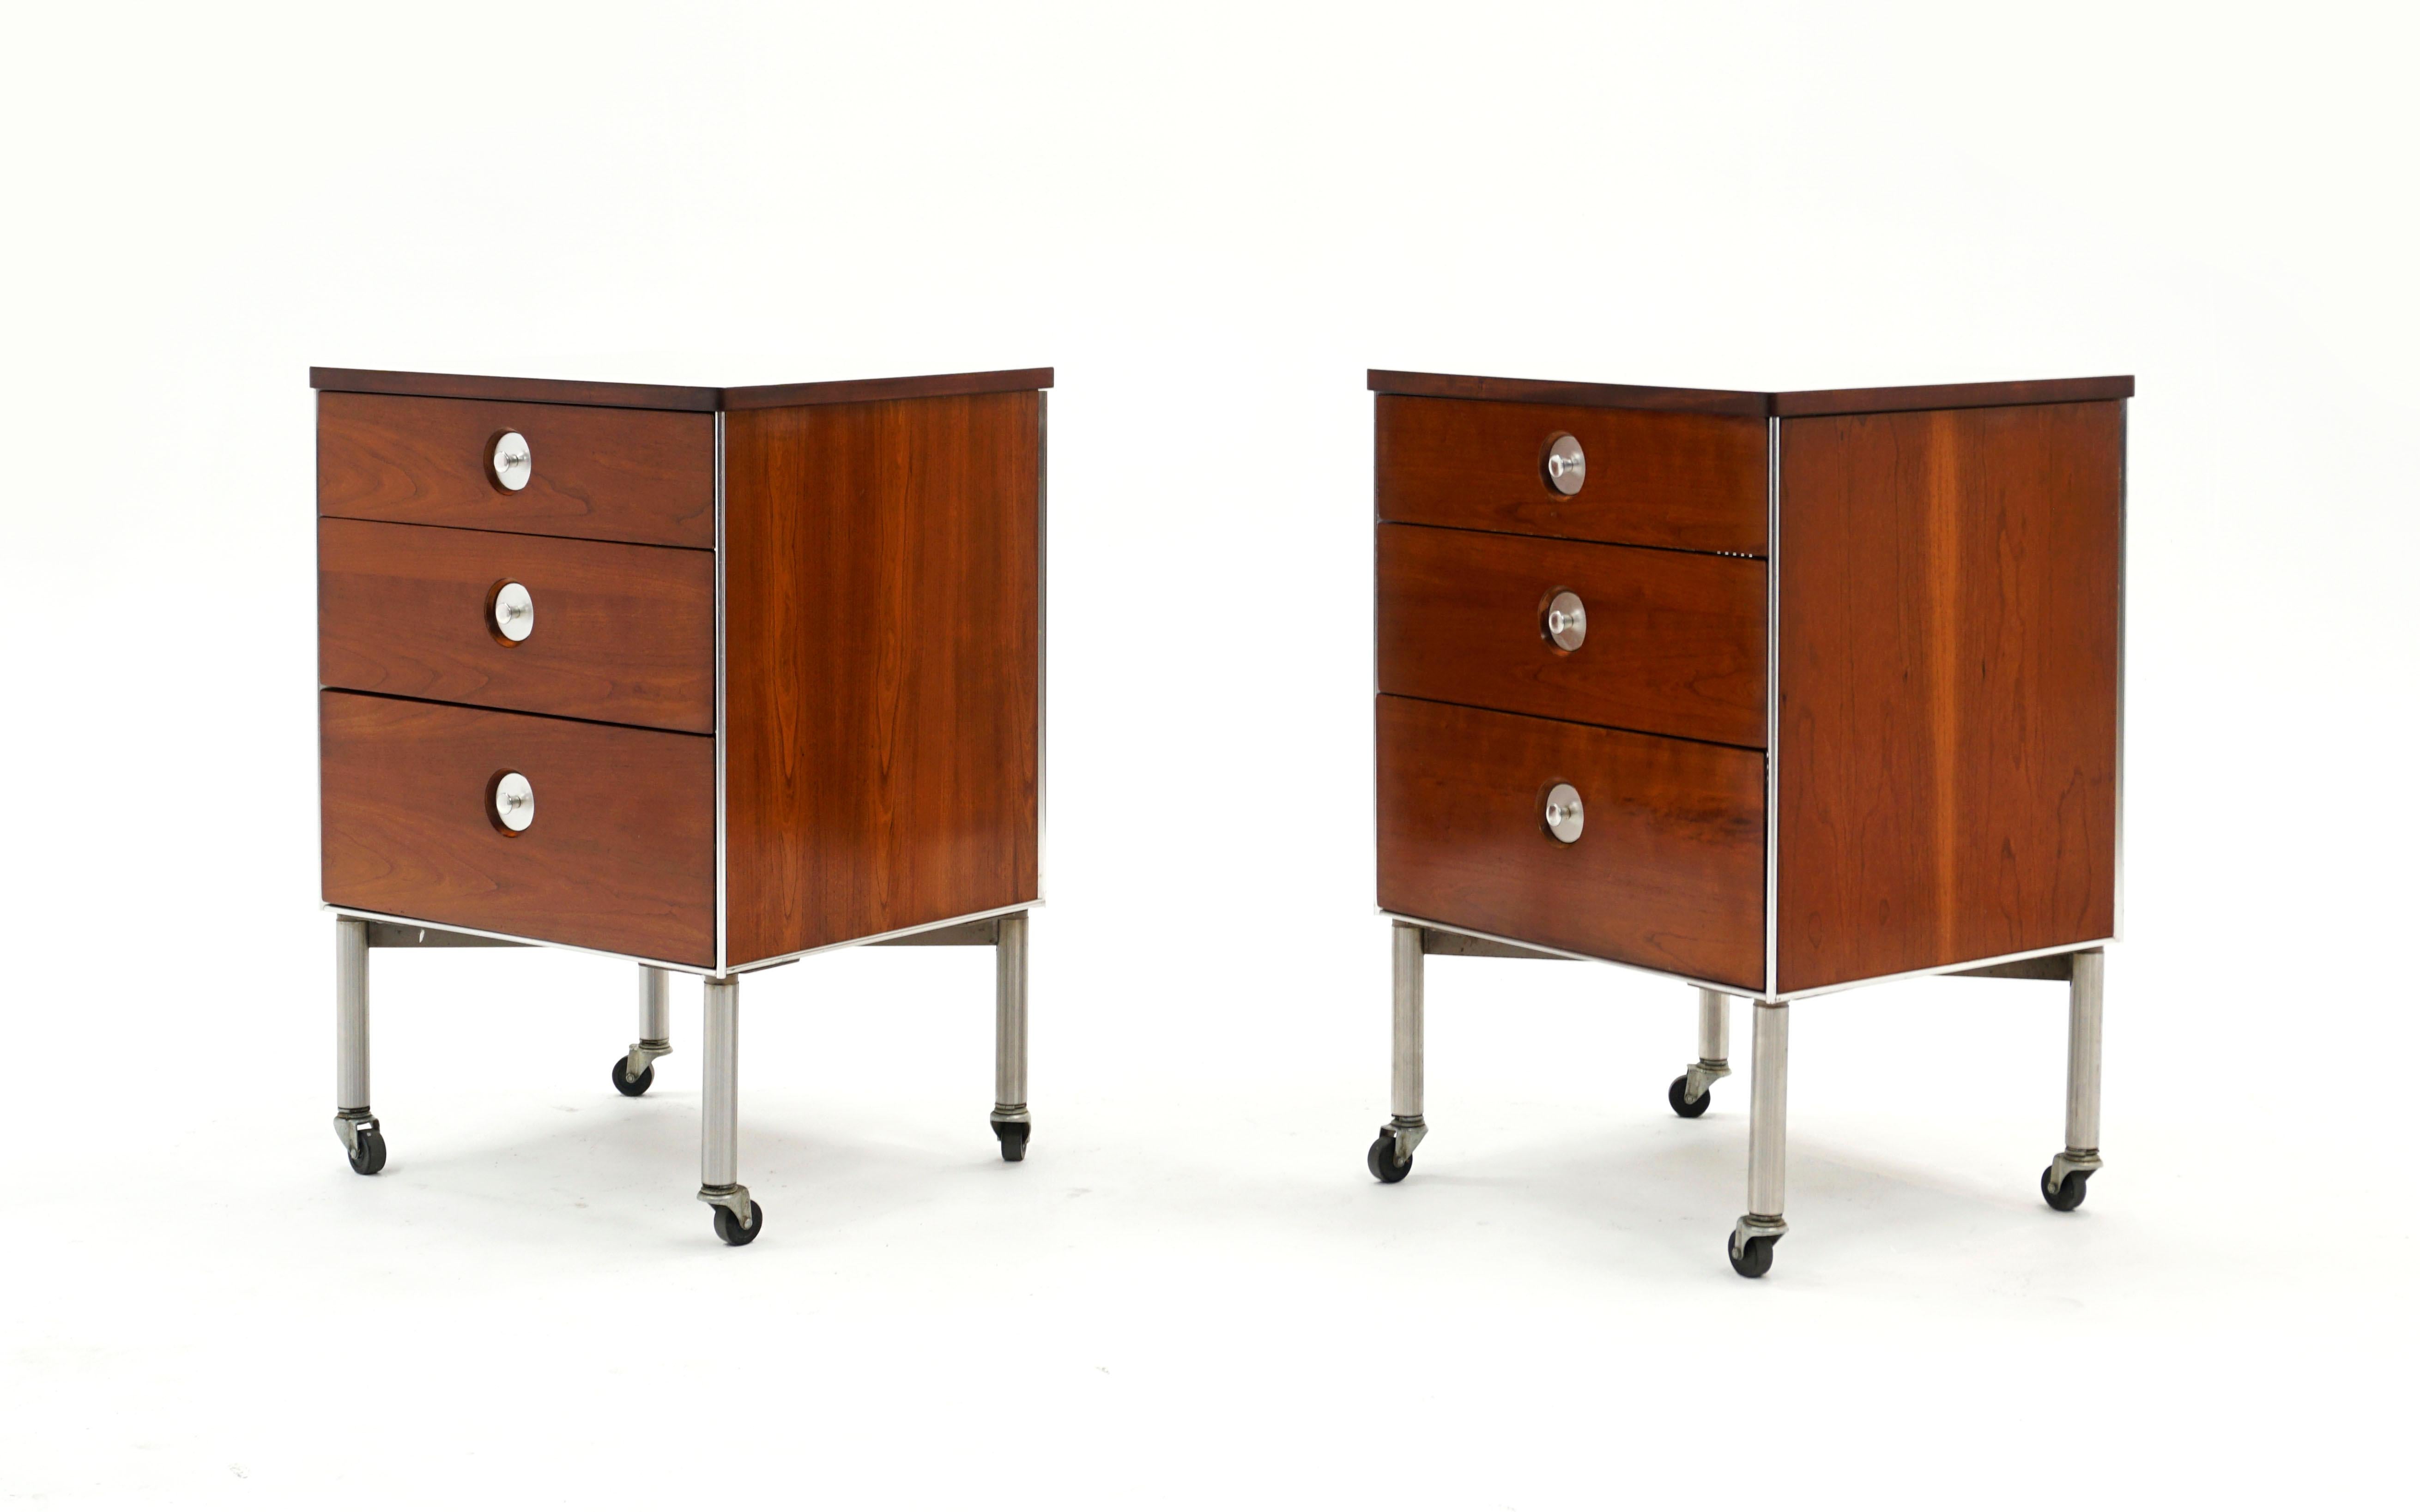 Pair of night stands / side tables designed by Raymond Loewy and manufactured by Hill Rom. Walnut with lightly patterned off white laminate tops and aluminum pulls and trip. Three drawers. Both on the original casters. Very good condition and ready